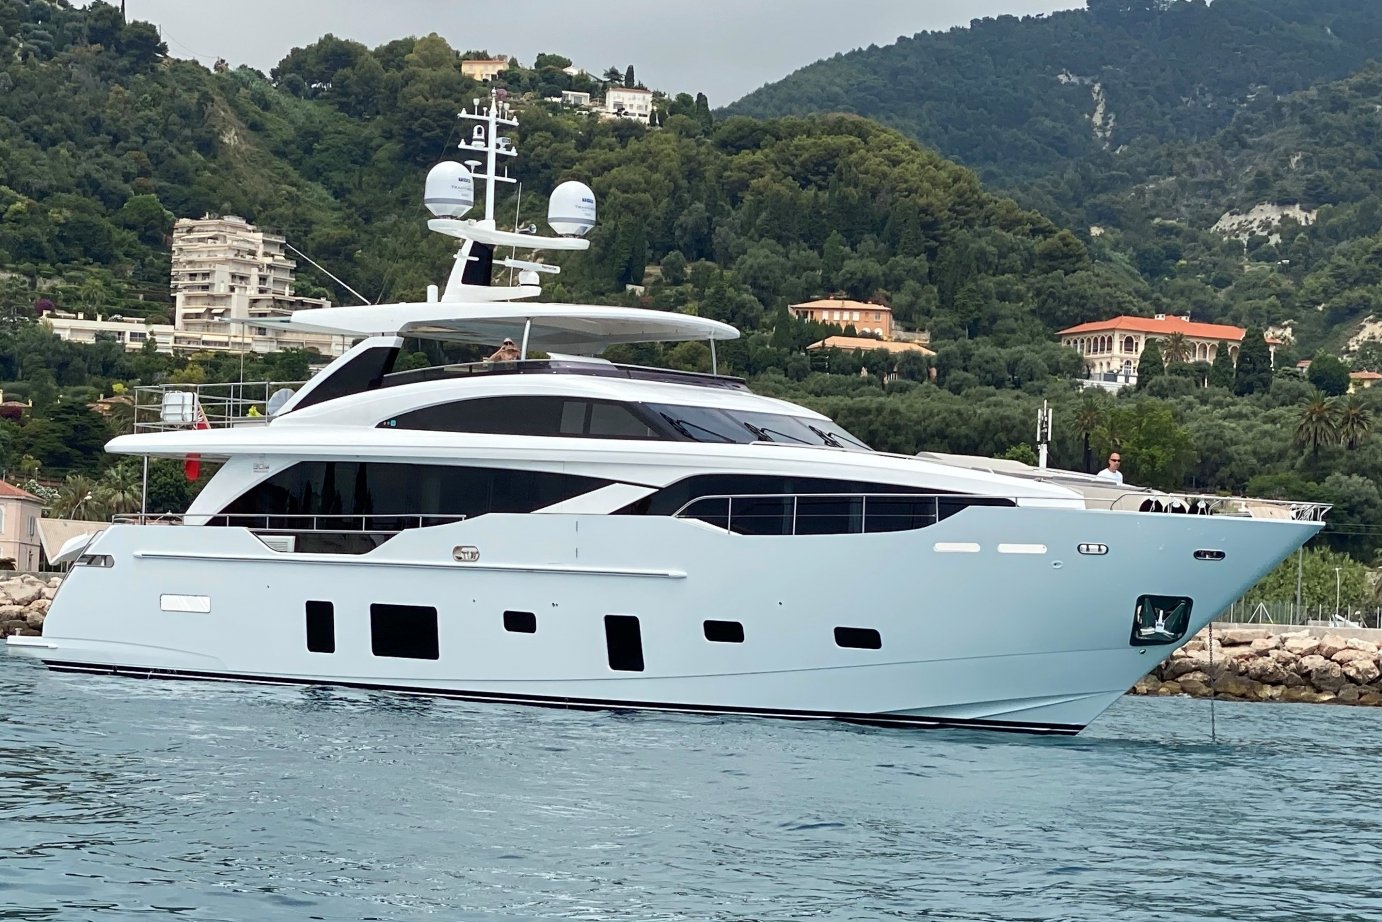 Yacht BLUE PEARL - Princess Yachts  - 2020 - Location (Live)